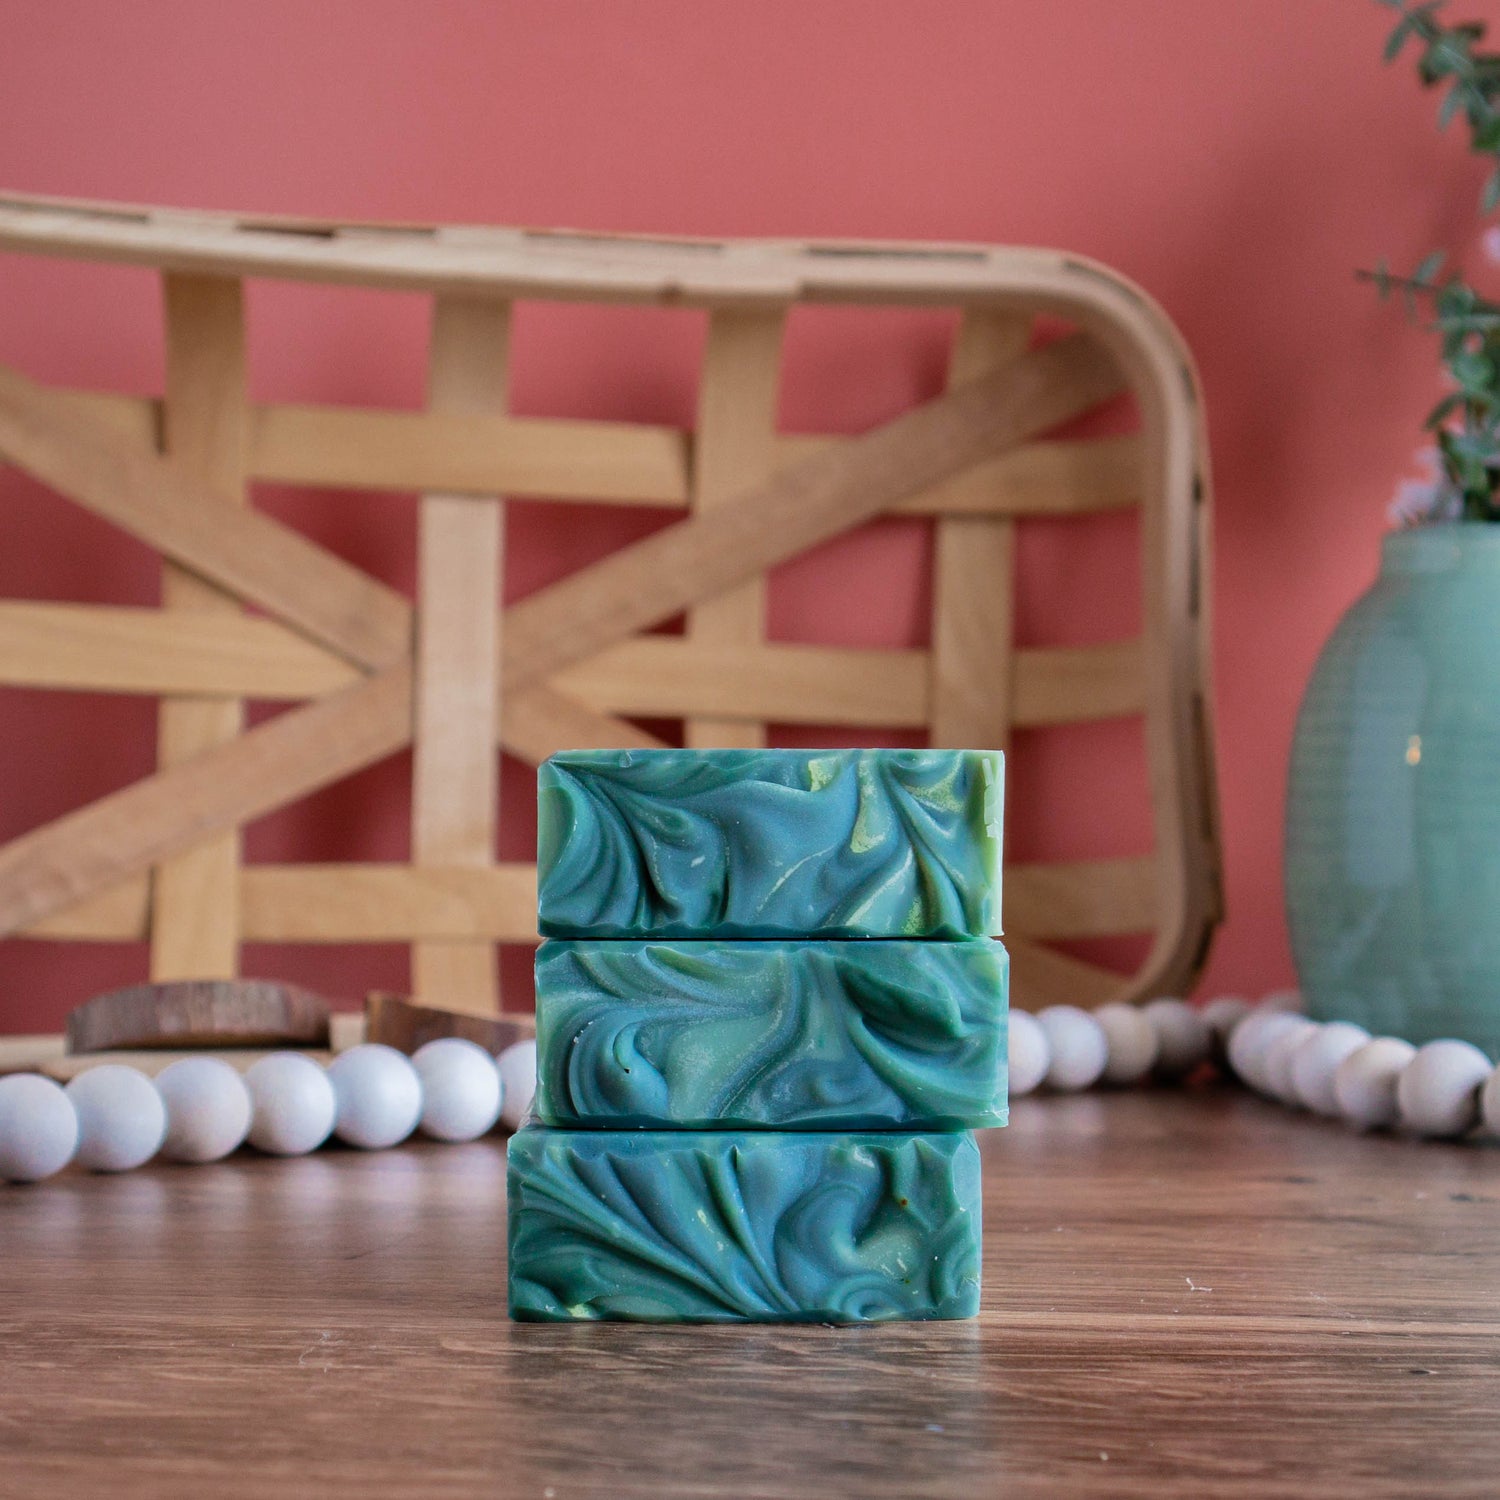 three bars of aspen soap are stacked showing the tops. they are sitting on a wooden board and there is a coral color background. in the back left is a woven wooden basket and in the back right is a green vase with some florals. there is a white bead rope running along in behind the soaps